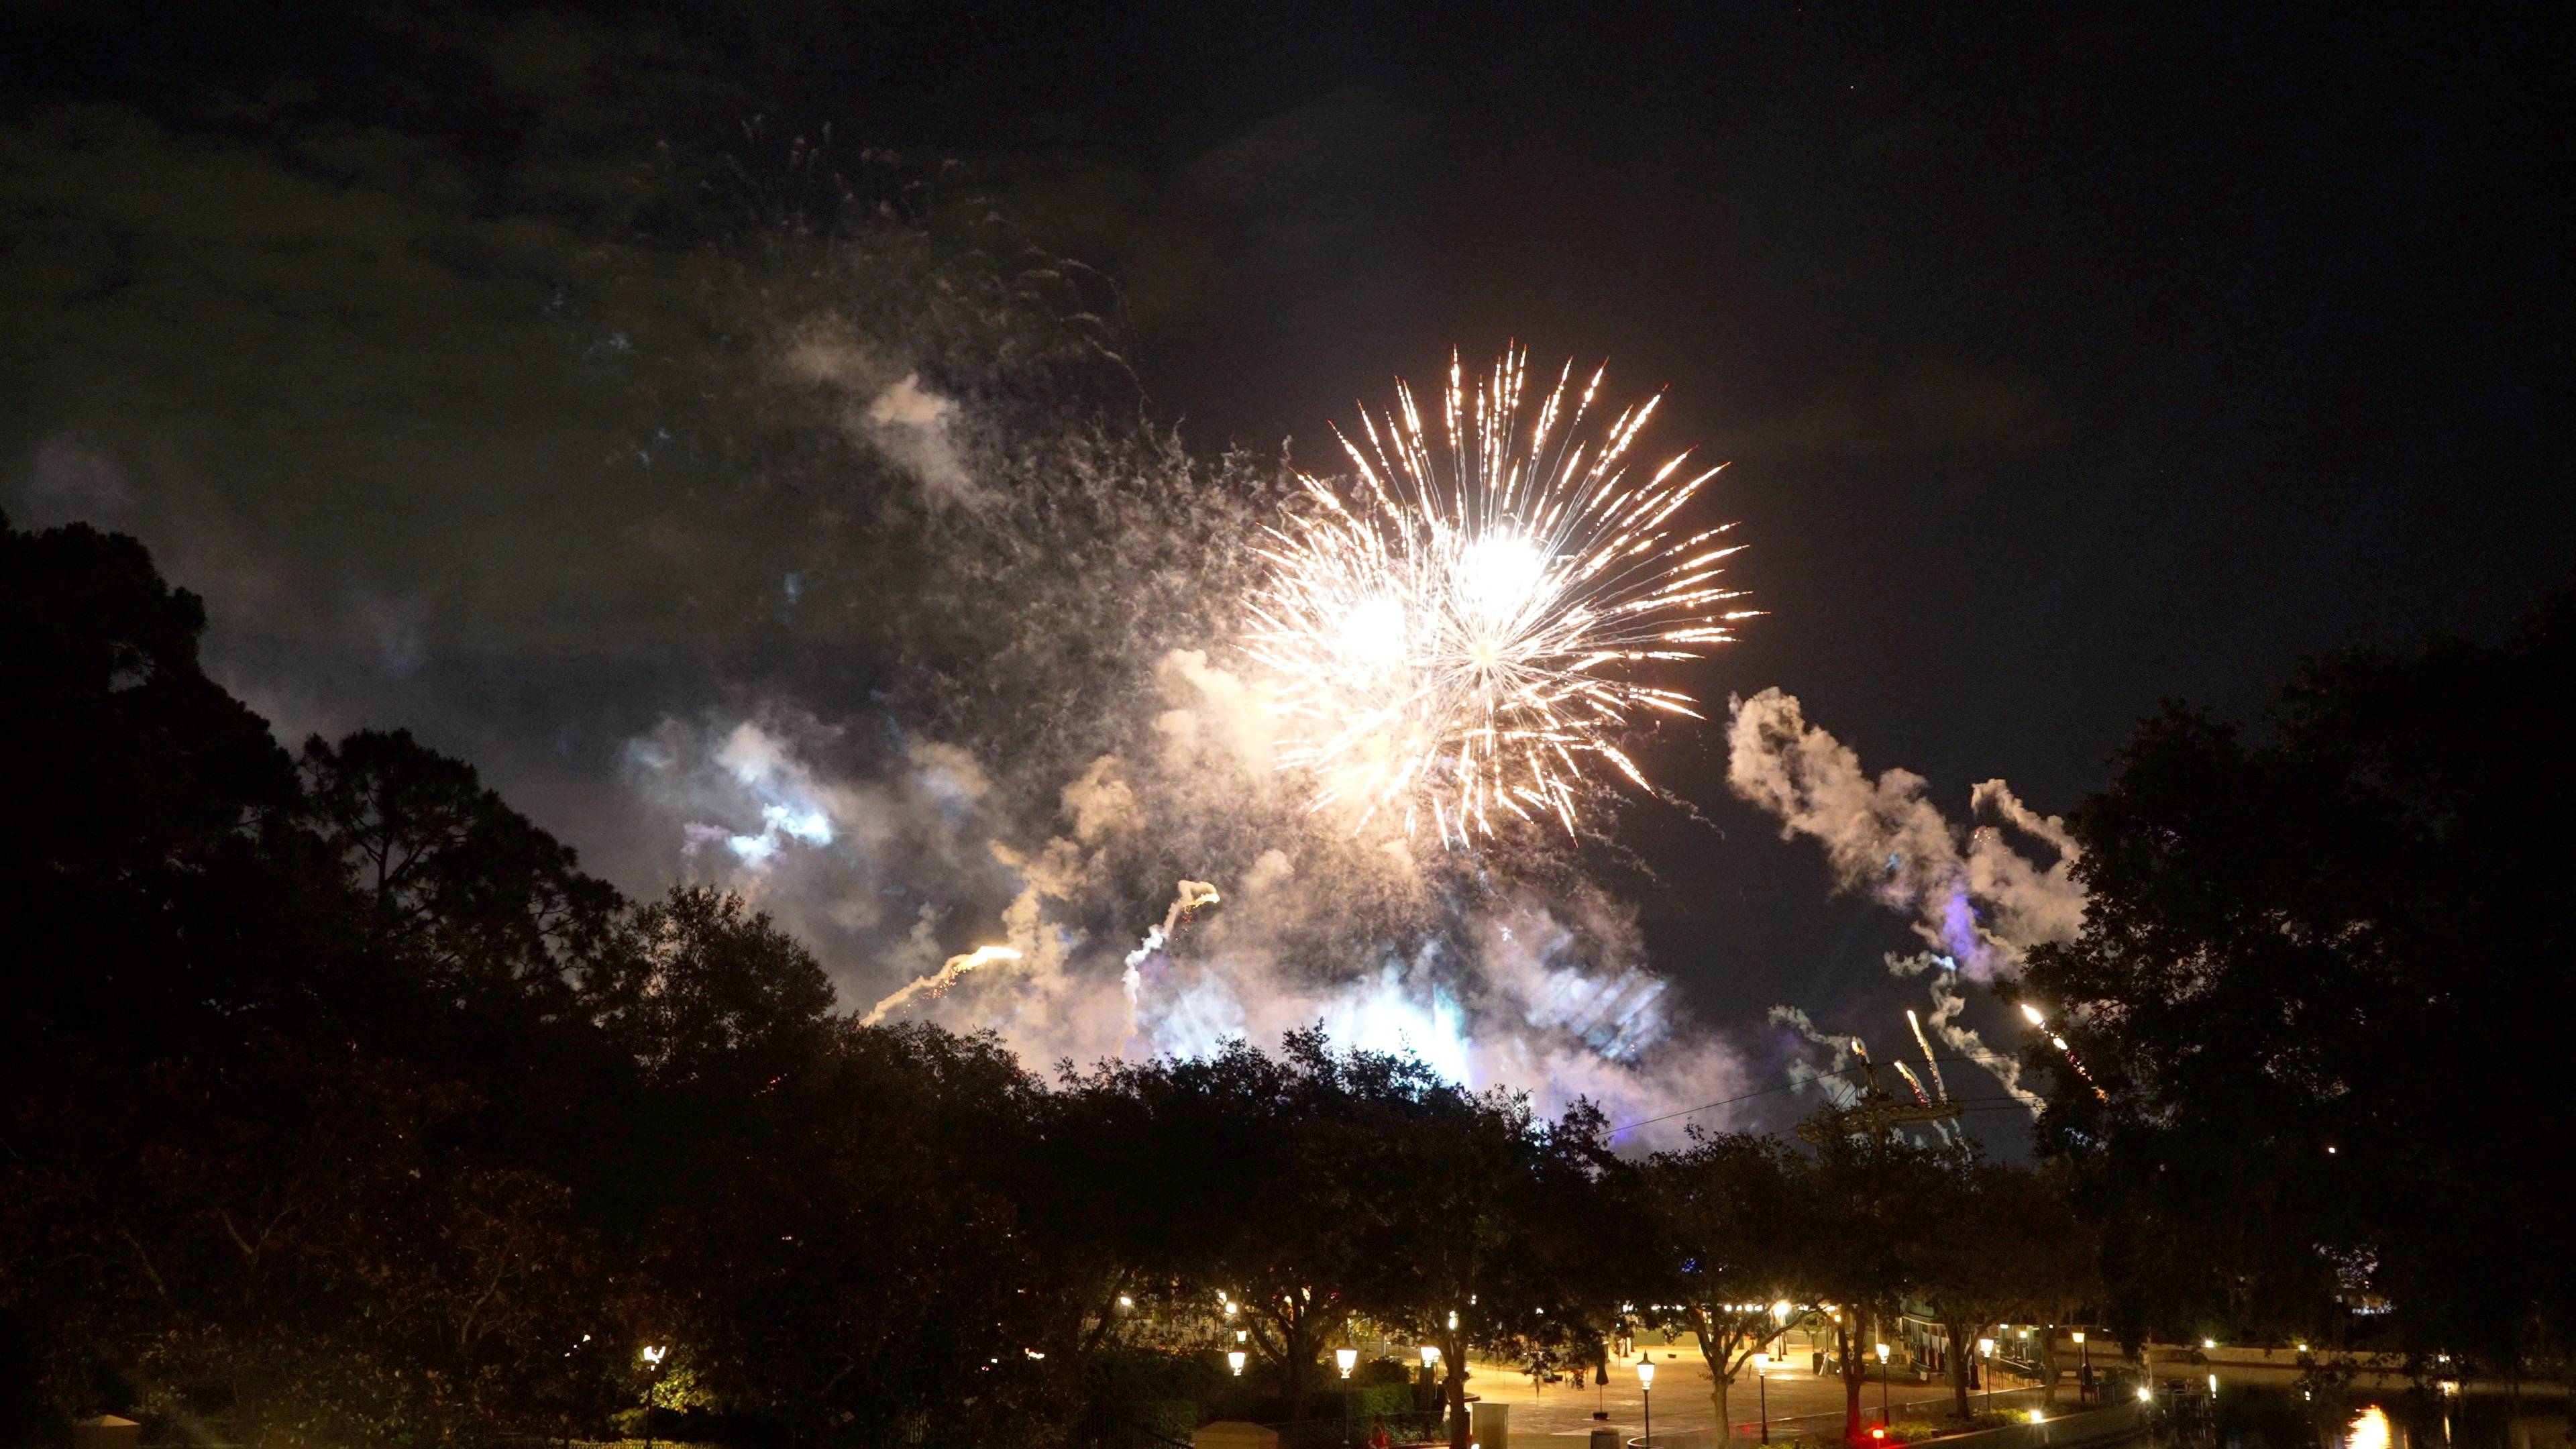 Full scale Harmonious test shows off impressive fireworks ahead of the show's debut later this year at Disney World